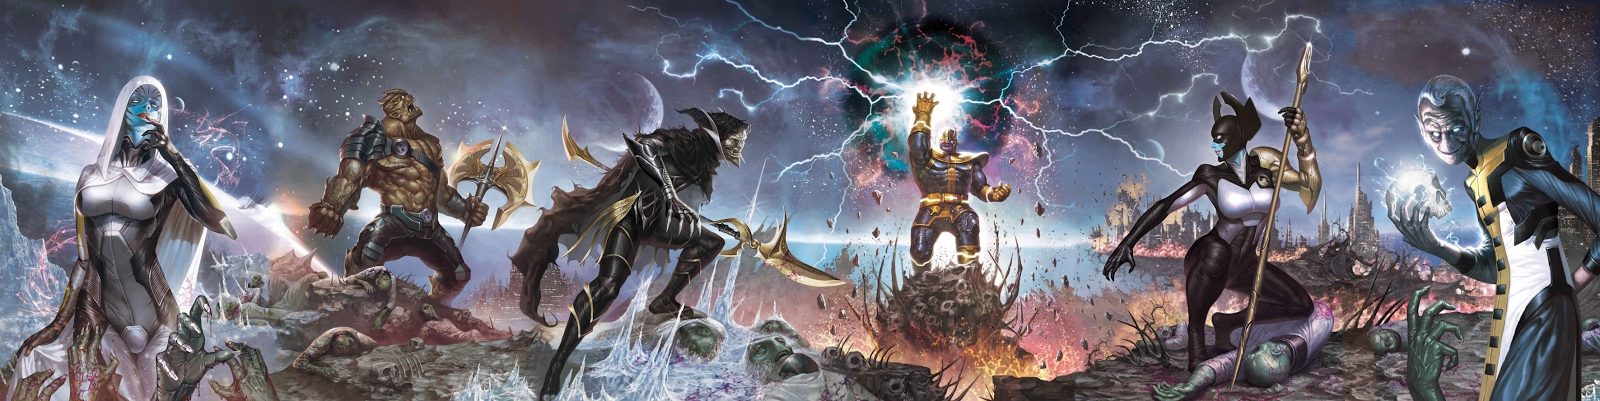 The Black Order Are Thanos' Personal Harbingers of Death